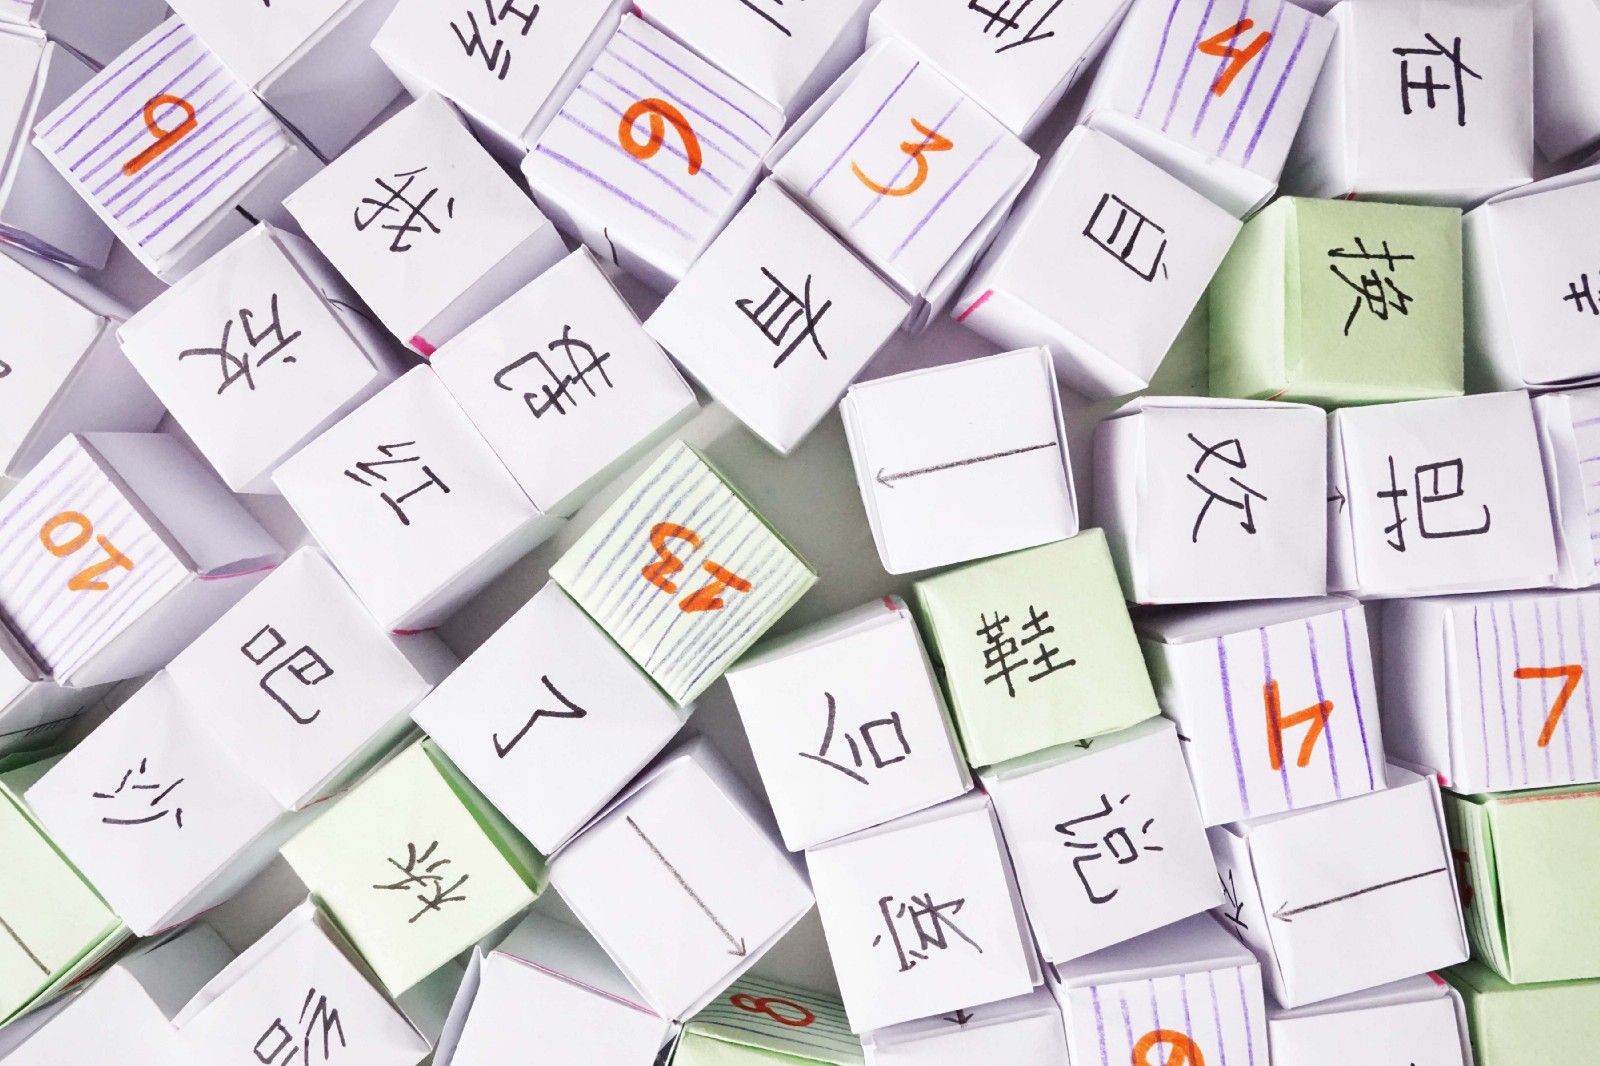 5 Crucial Methods for Memorizing Chinese Characters